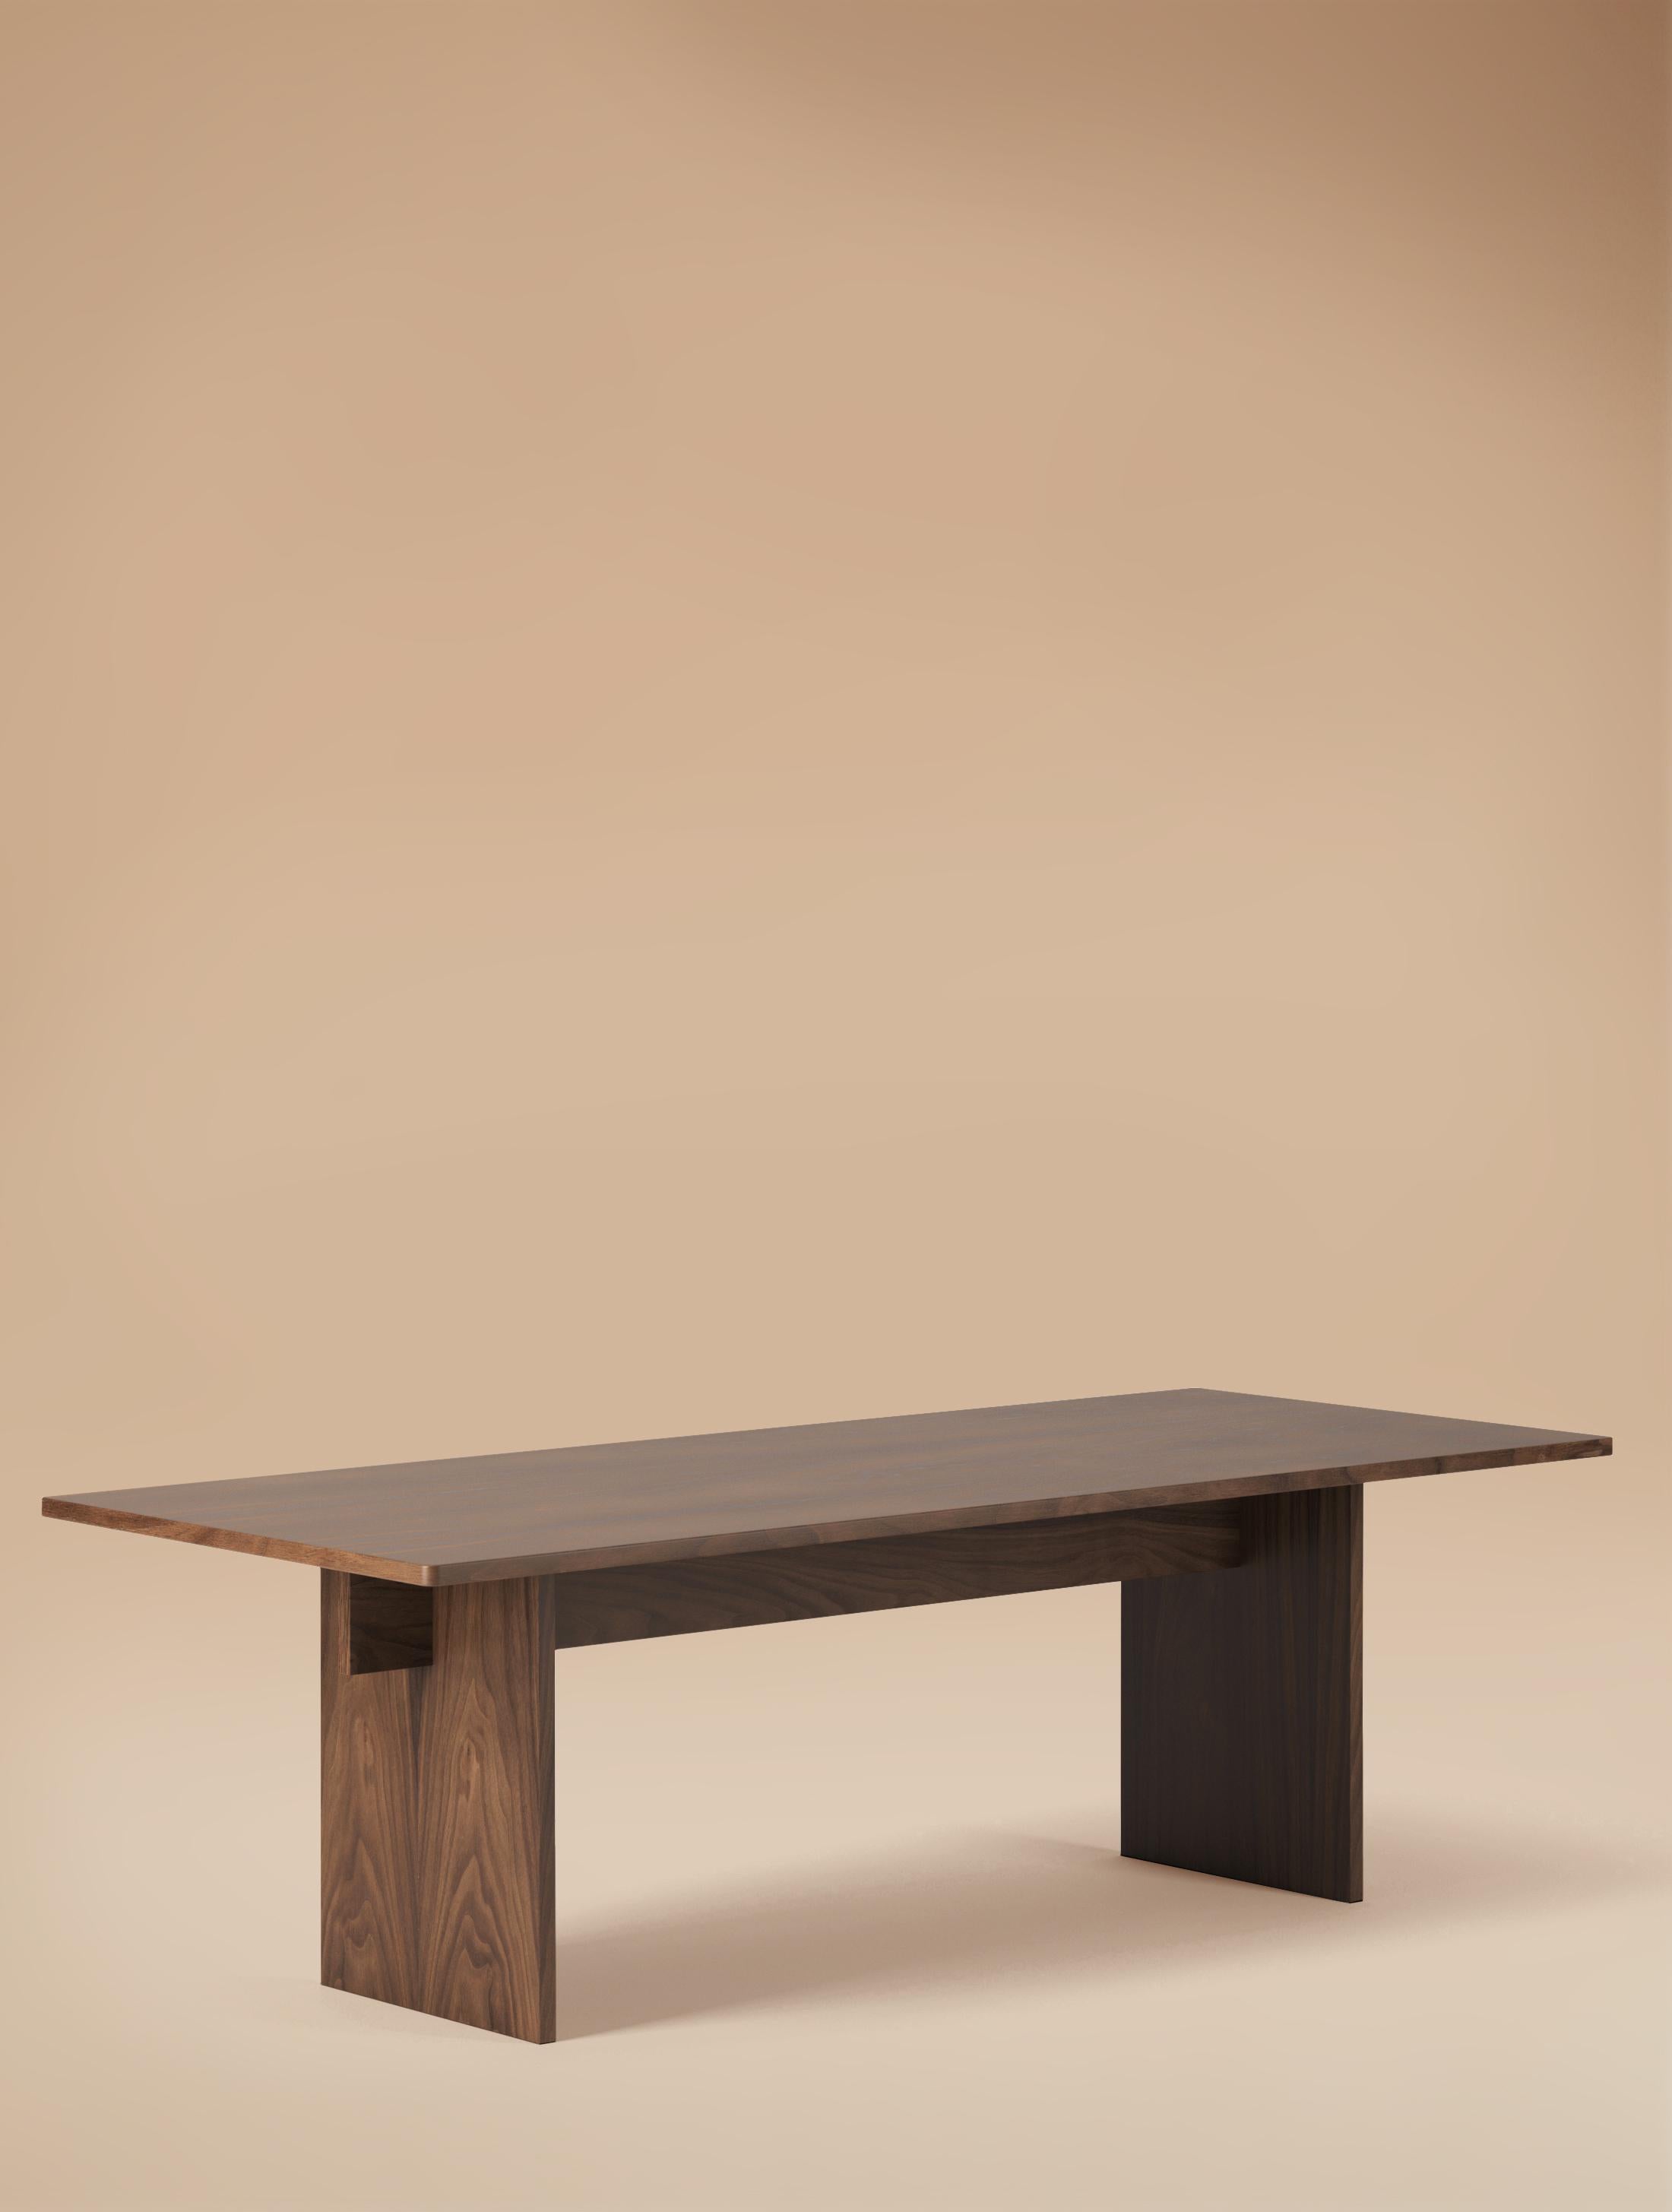 Minimalist 8 Seater  Faure Table Handcrafted in Walnut by Kevin Frankental for Lemon 